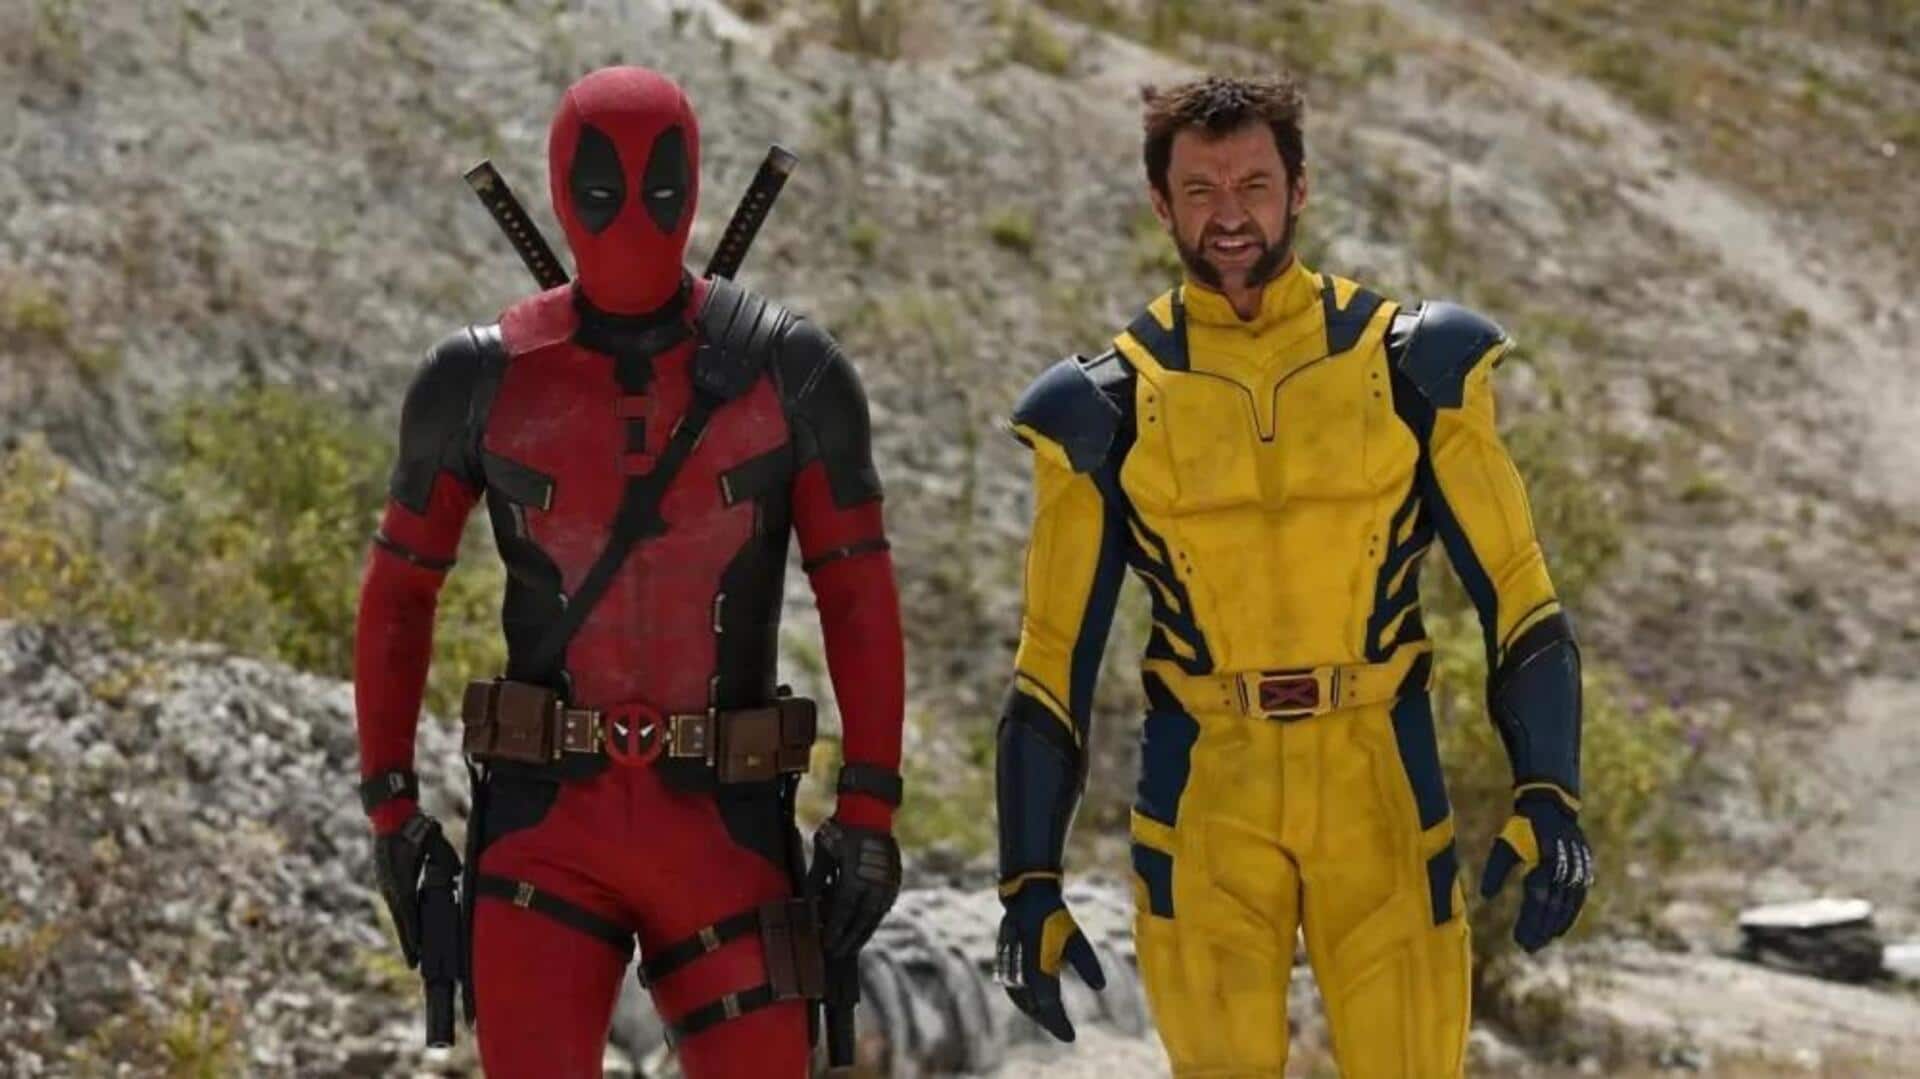 'Deadpool & Wolverine' trailer reveals plotline and crossover moments